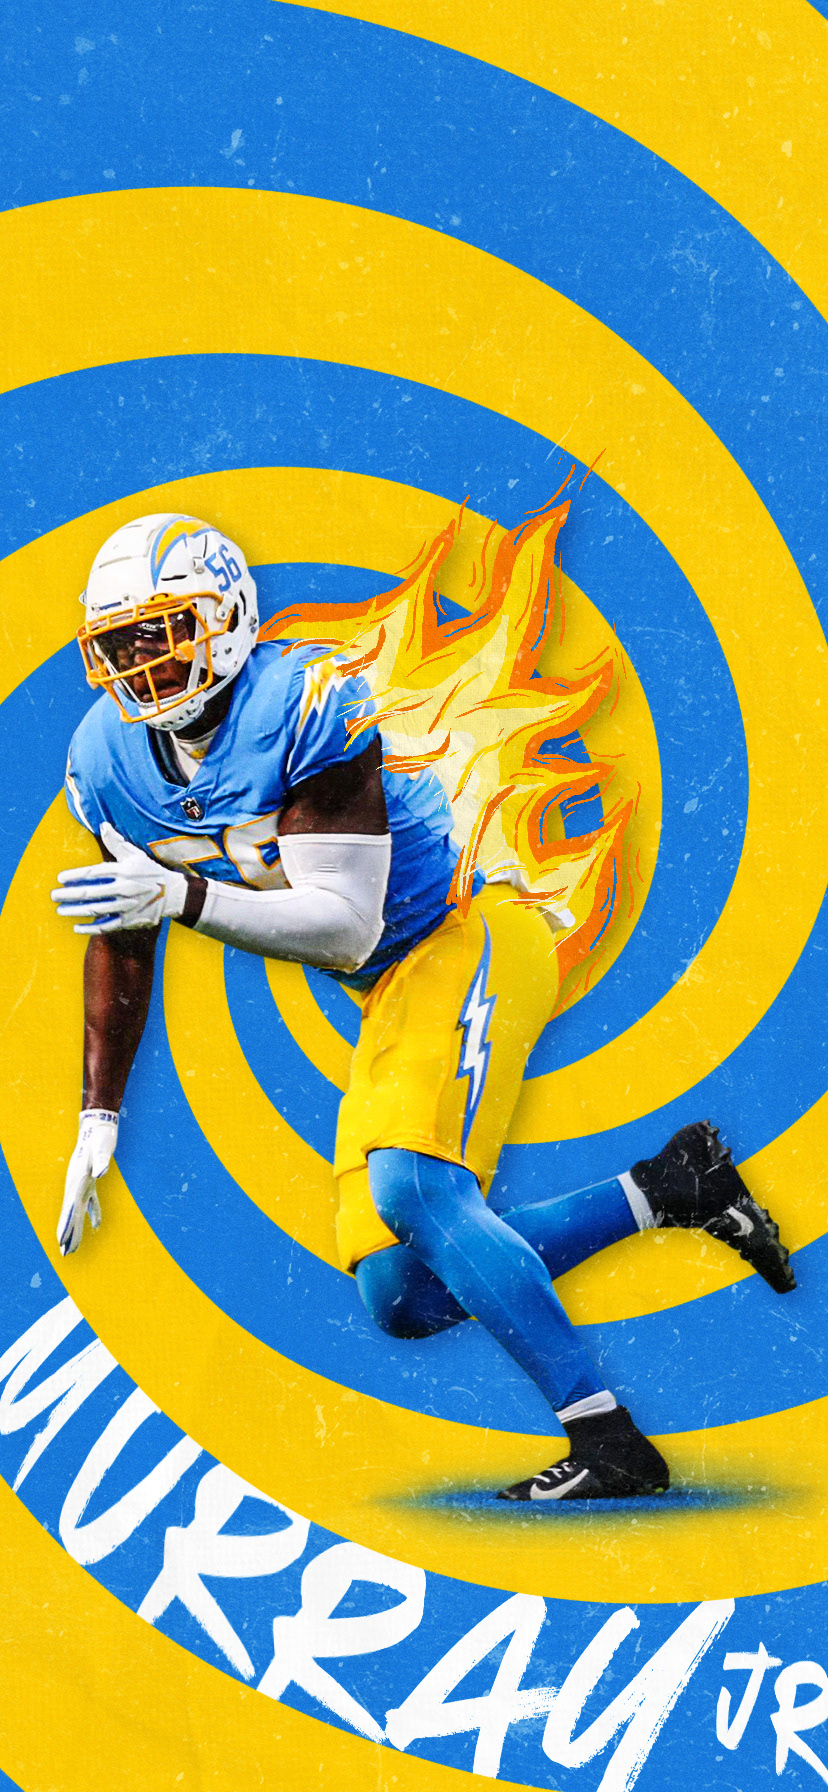 NFL Mobile Wallpapers (Chargers) on Behance